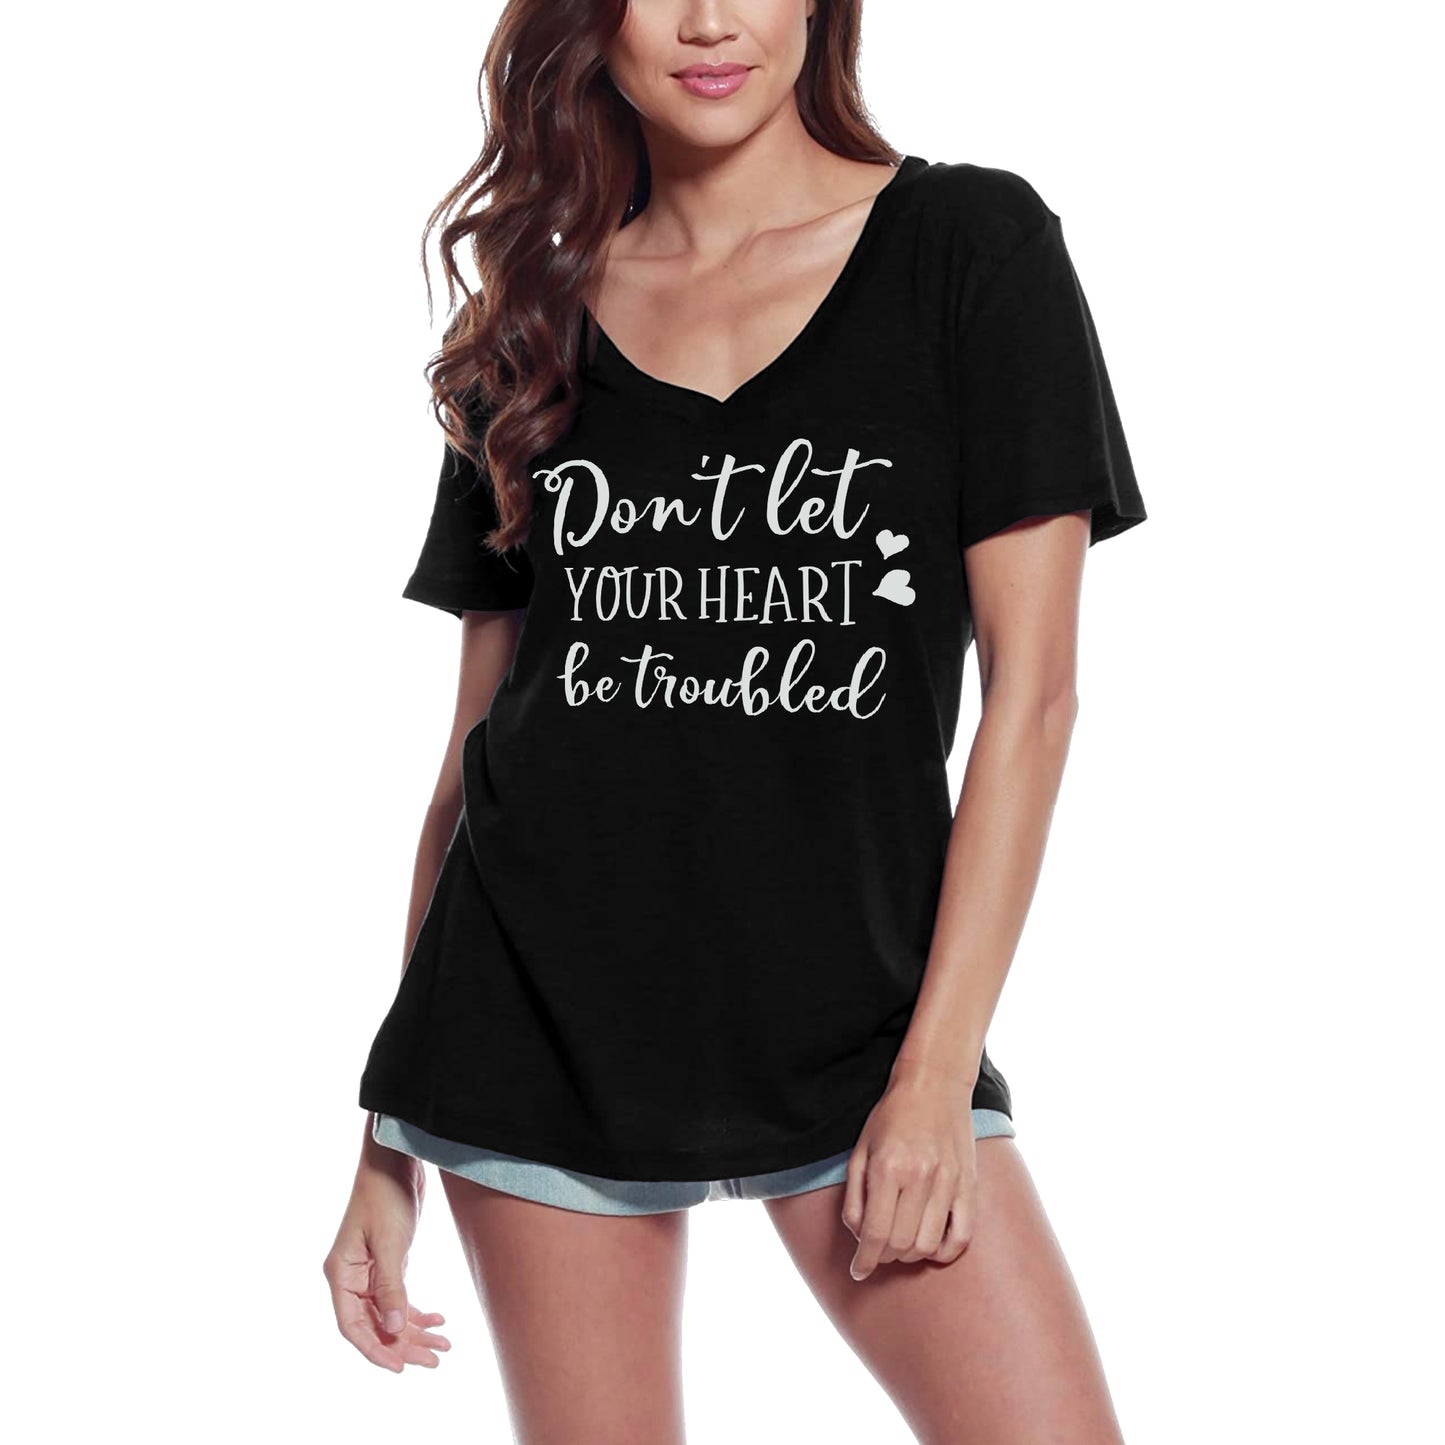 ULTRABASIC Women's T-Shirt Don't Let Your Heart Be Troubled - Short Sleeve Tee Shirt Tops